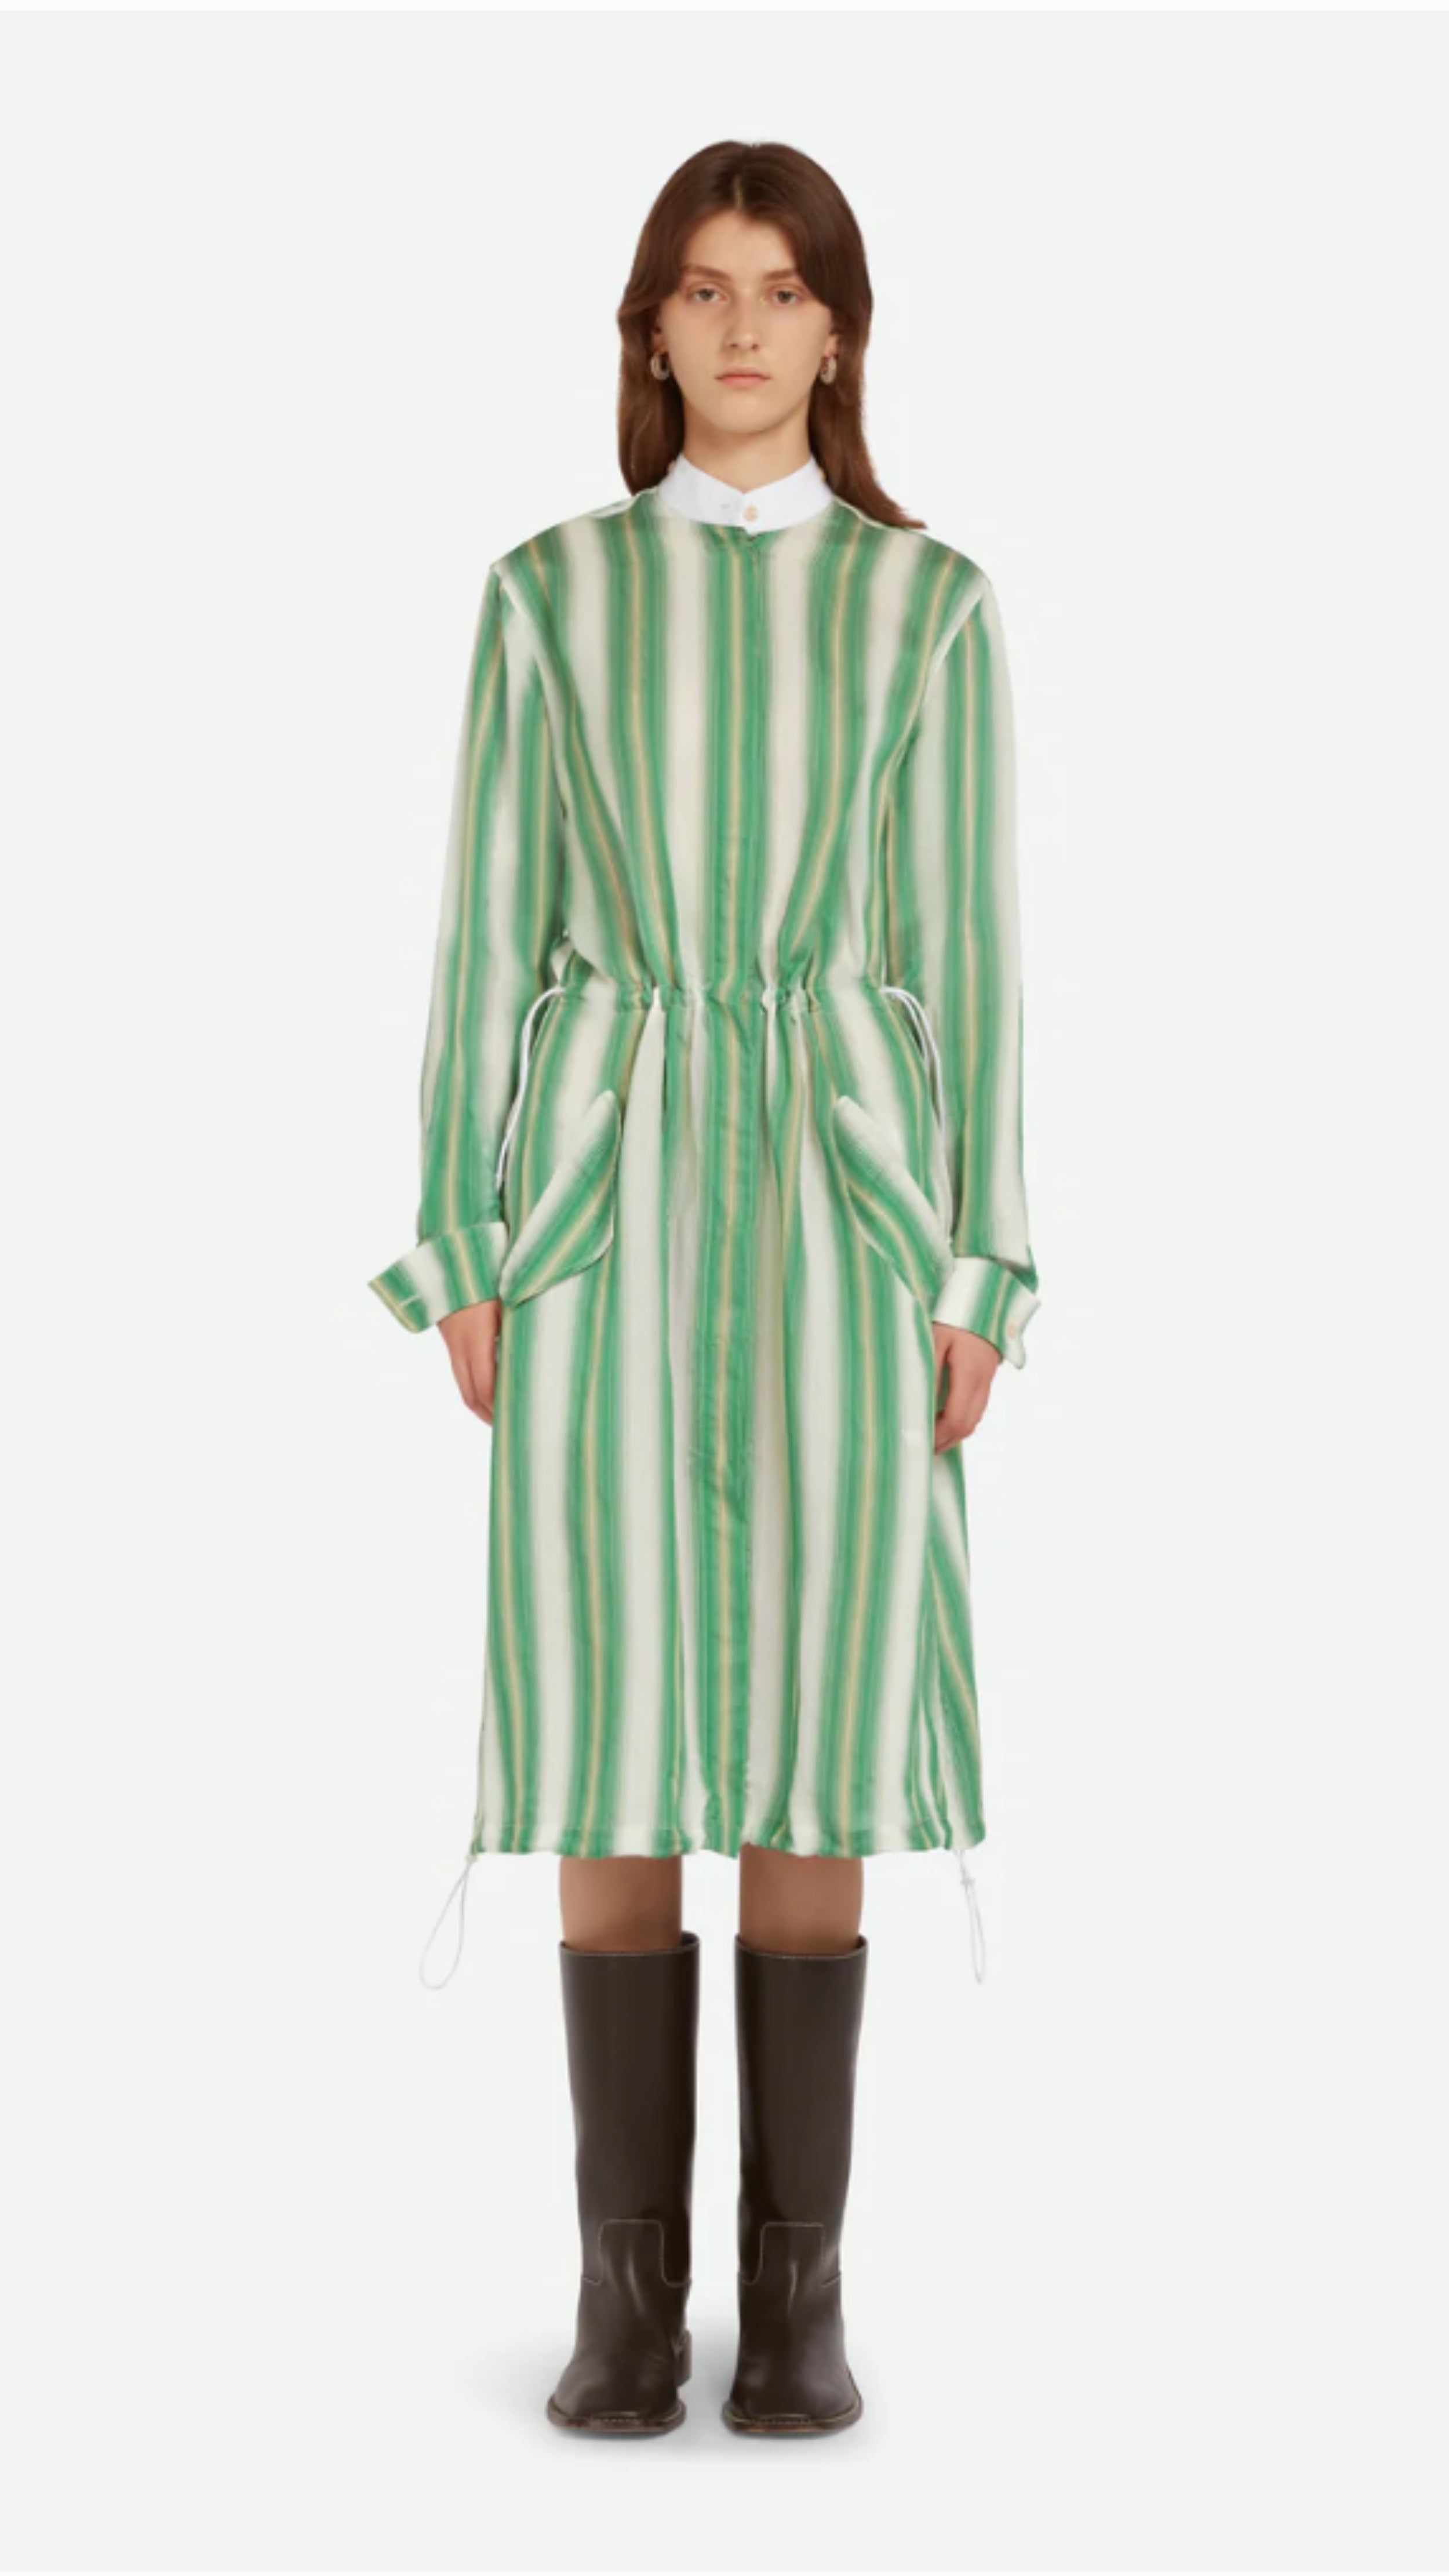 Wales Bonner Balance Dress Made in Italy in a lightweight silk blend. The midi dress has long sleeves, a white collared neck, and green and white stripes. The shirt dress has an adjustable drawstring waist, buttons up the front, and deep front pockets. Shown on model facing front.